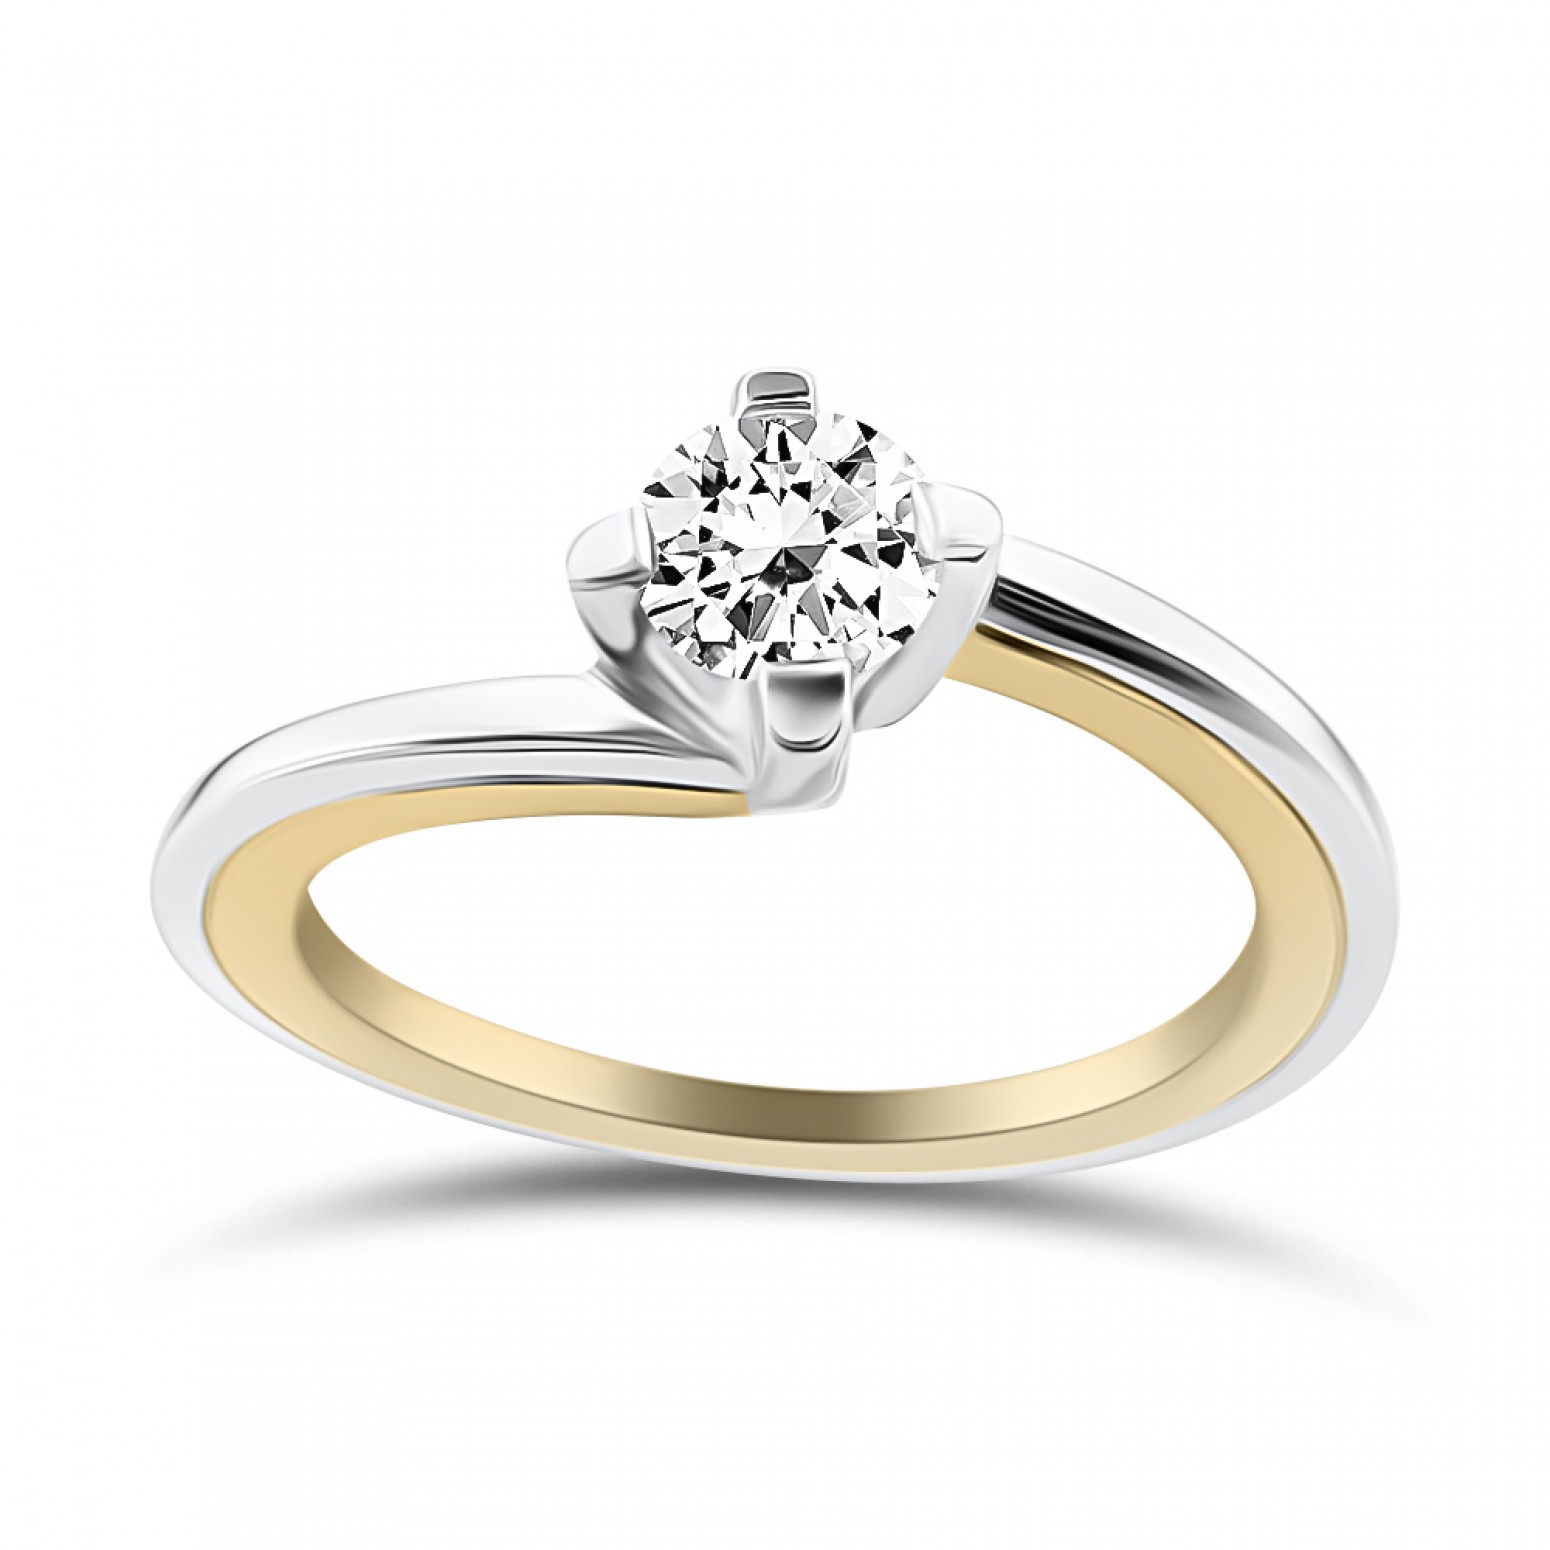 Solitaire ring 18K white and yellow gold with diamond 0.28ct, VVS2, G from IGL da3979 ENGAGEMENT RINGS Κοσμηματα - chrilia.gr